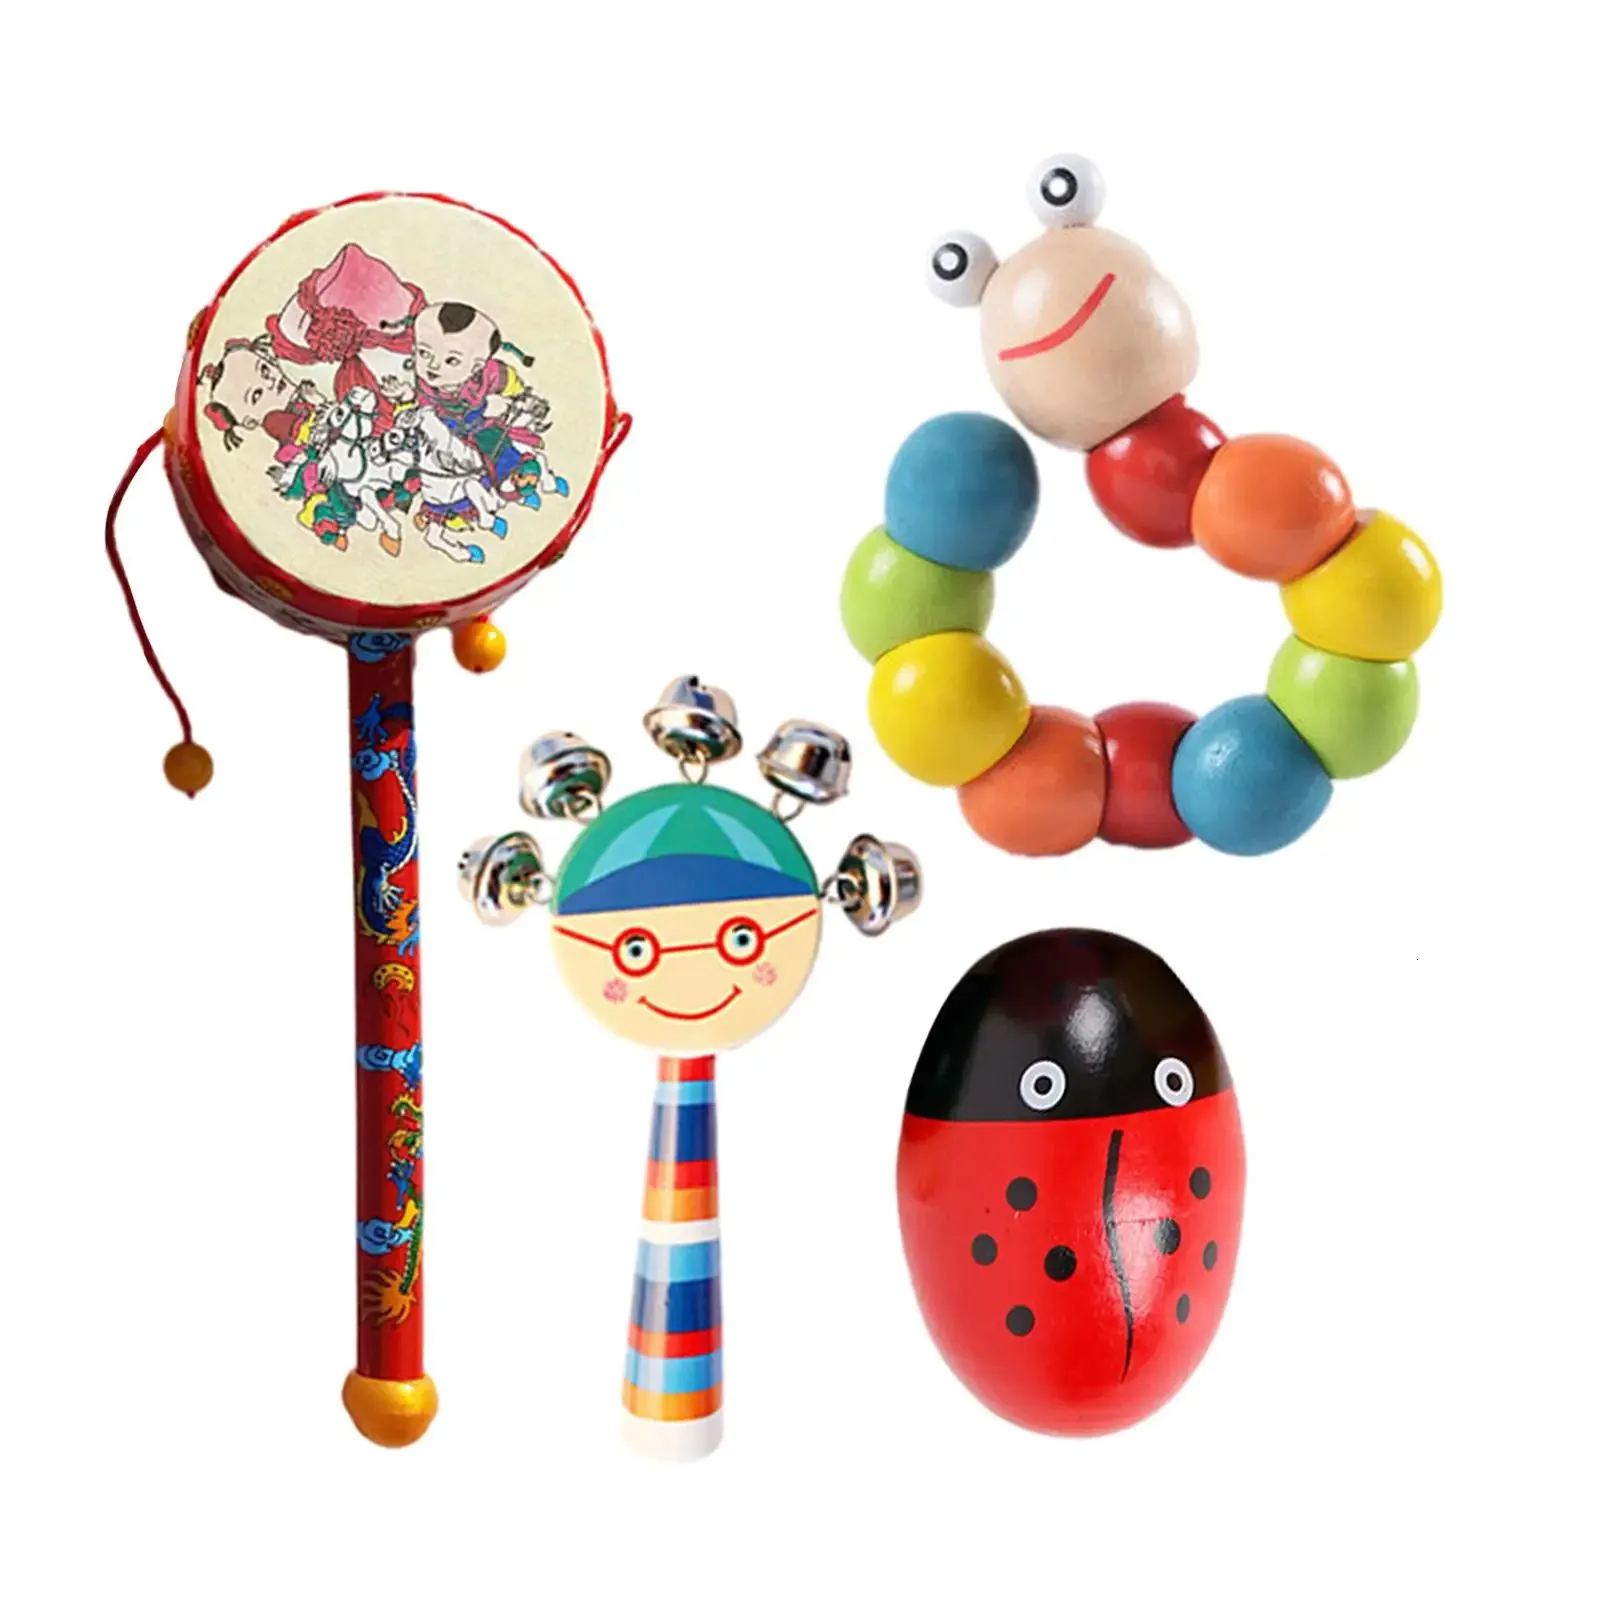 4 Pieces Wooden Percussion Musical Instrument Playset Noisemaker Toy Development Toy for Baby Newborn 3-6 Months Party Children